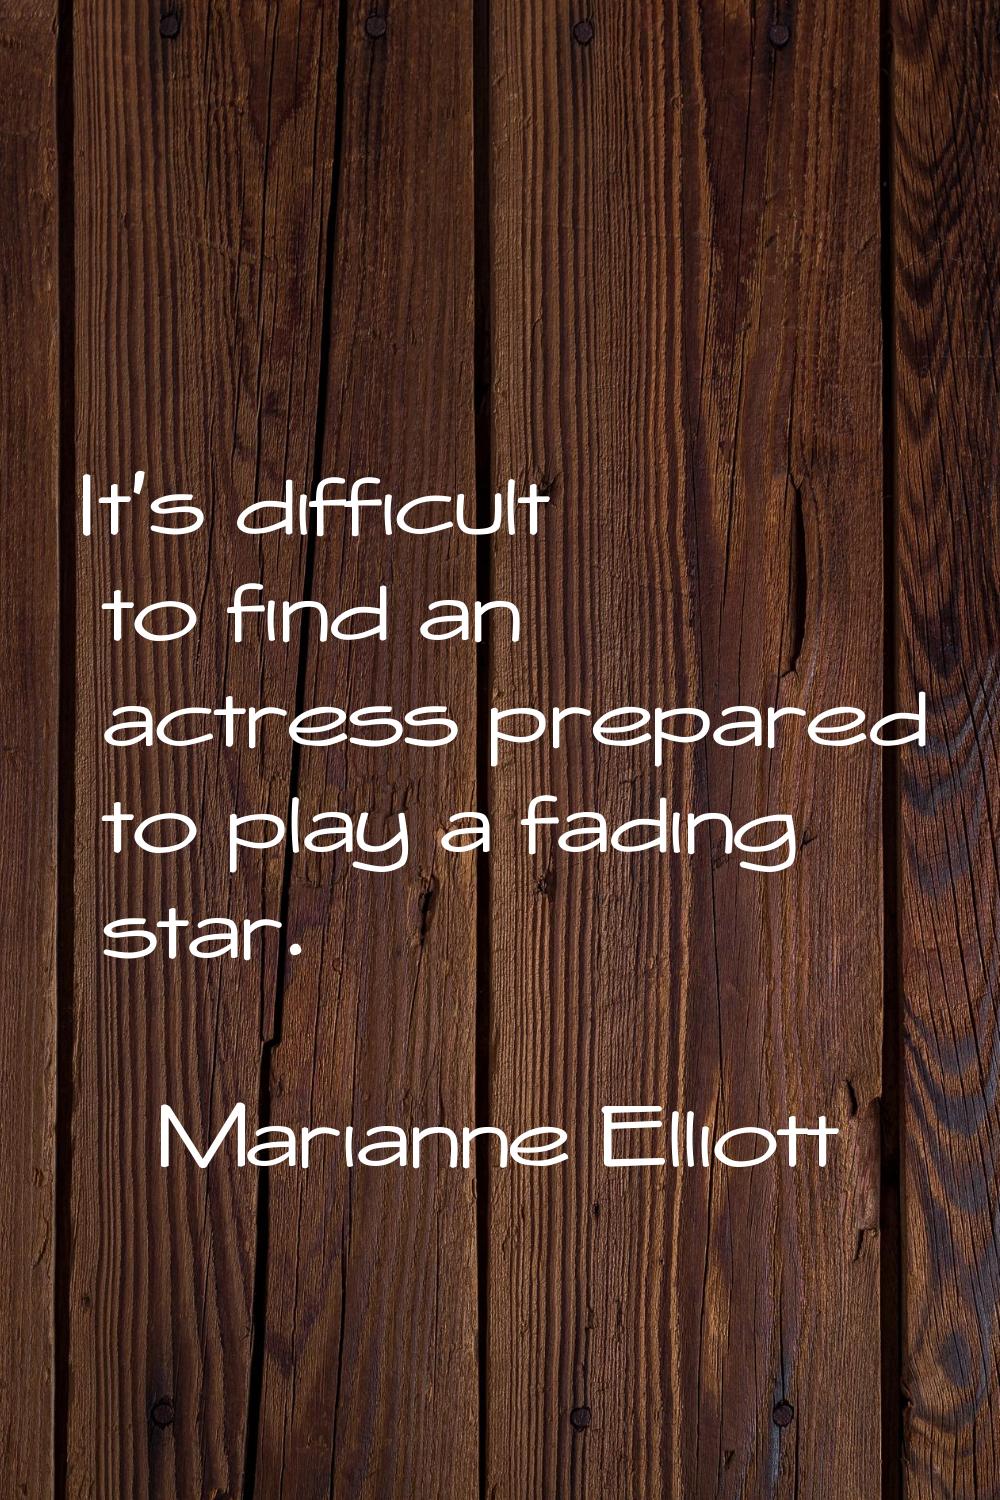 It's difficult to find an actress prepared to play a fading star.